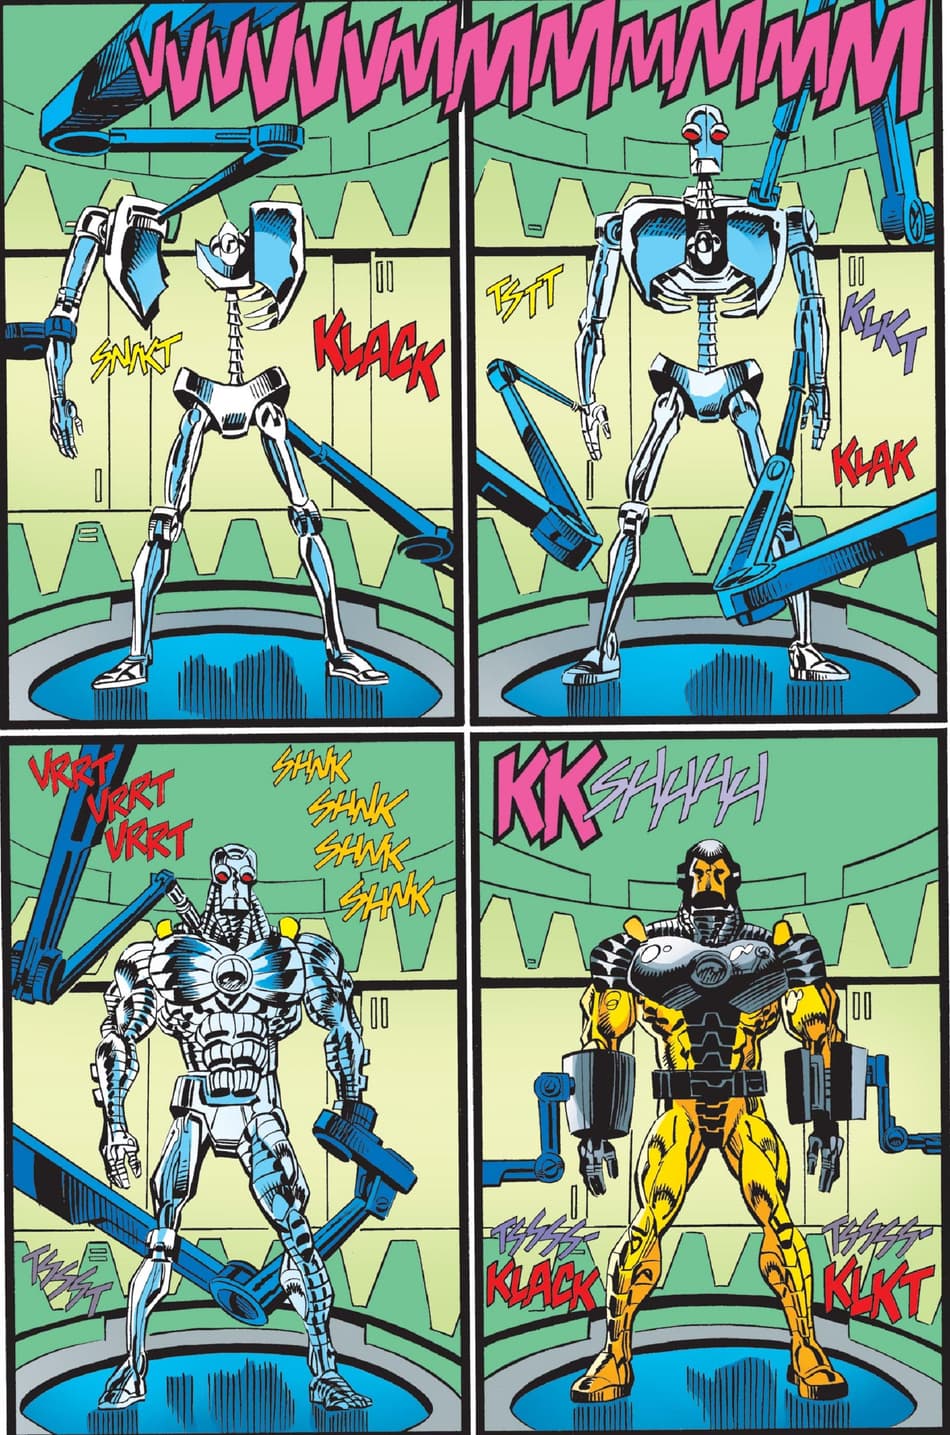 Mainframe’s true nature revealed in A-NEXT (1998) #8.